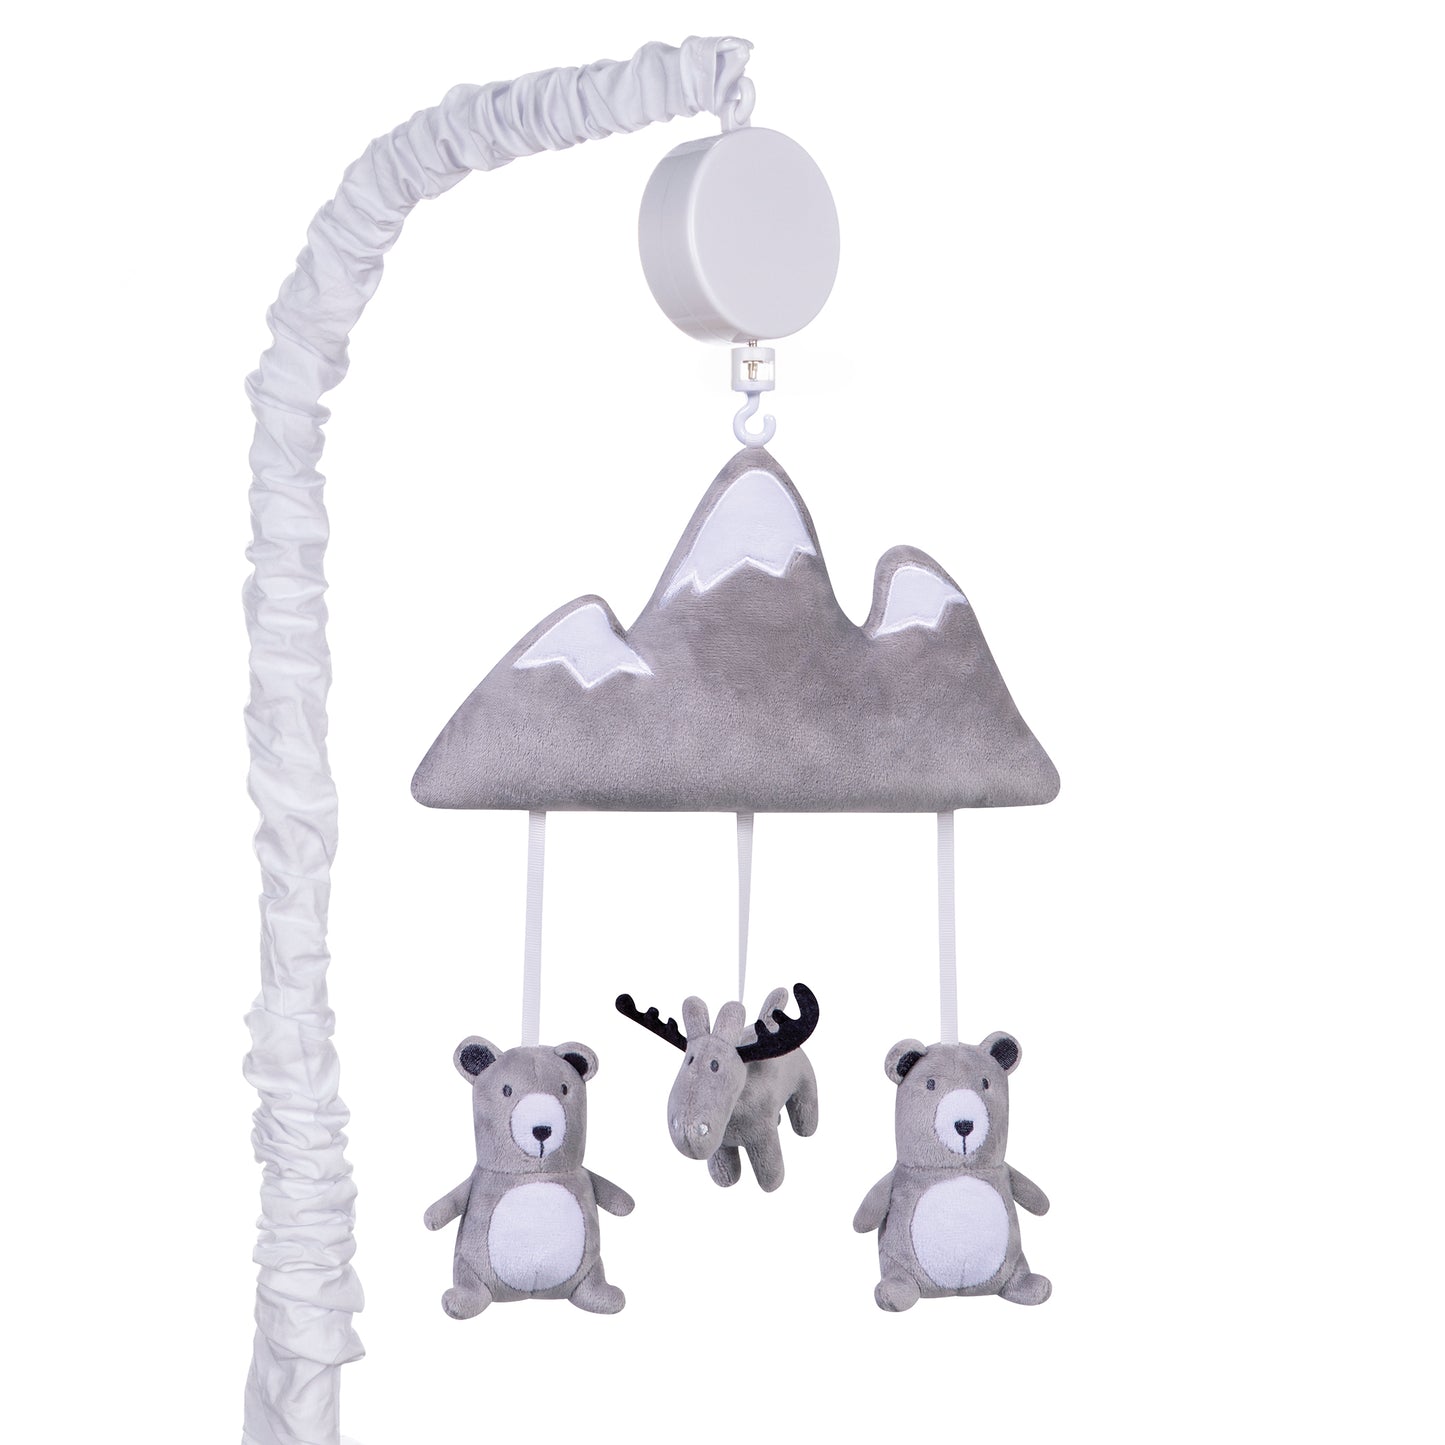 Forest Mountain Musical Crib Baby Mobile full size - A velour plush moose and two bears are suspended from a velour plush mountain with decorative white ribbon and slowly rotates to Brahms’ Lullaby